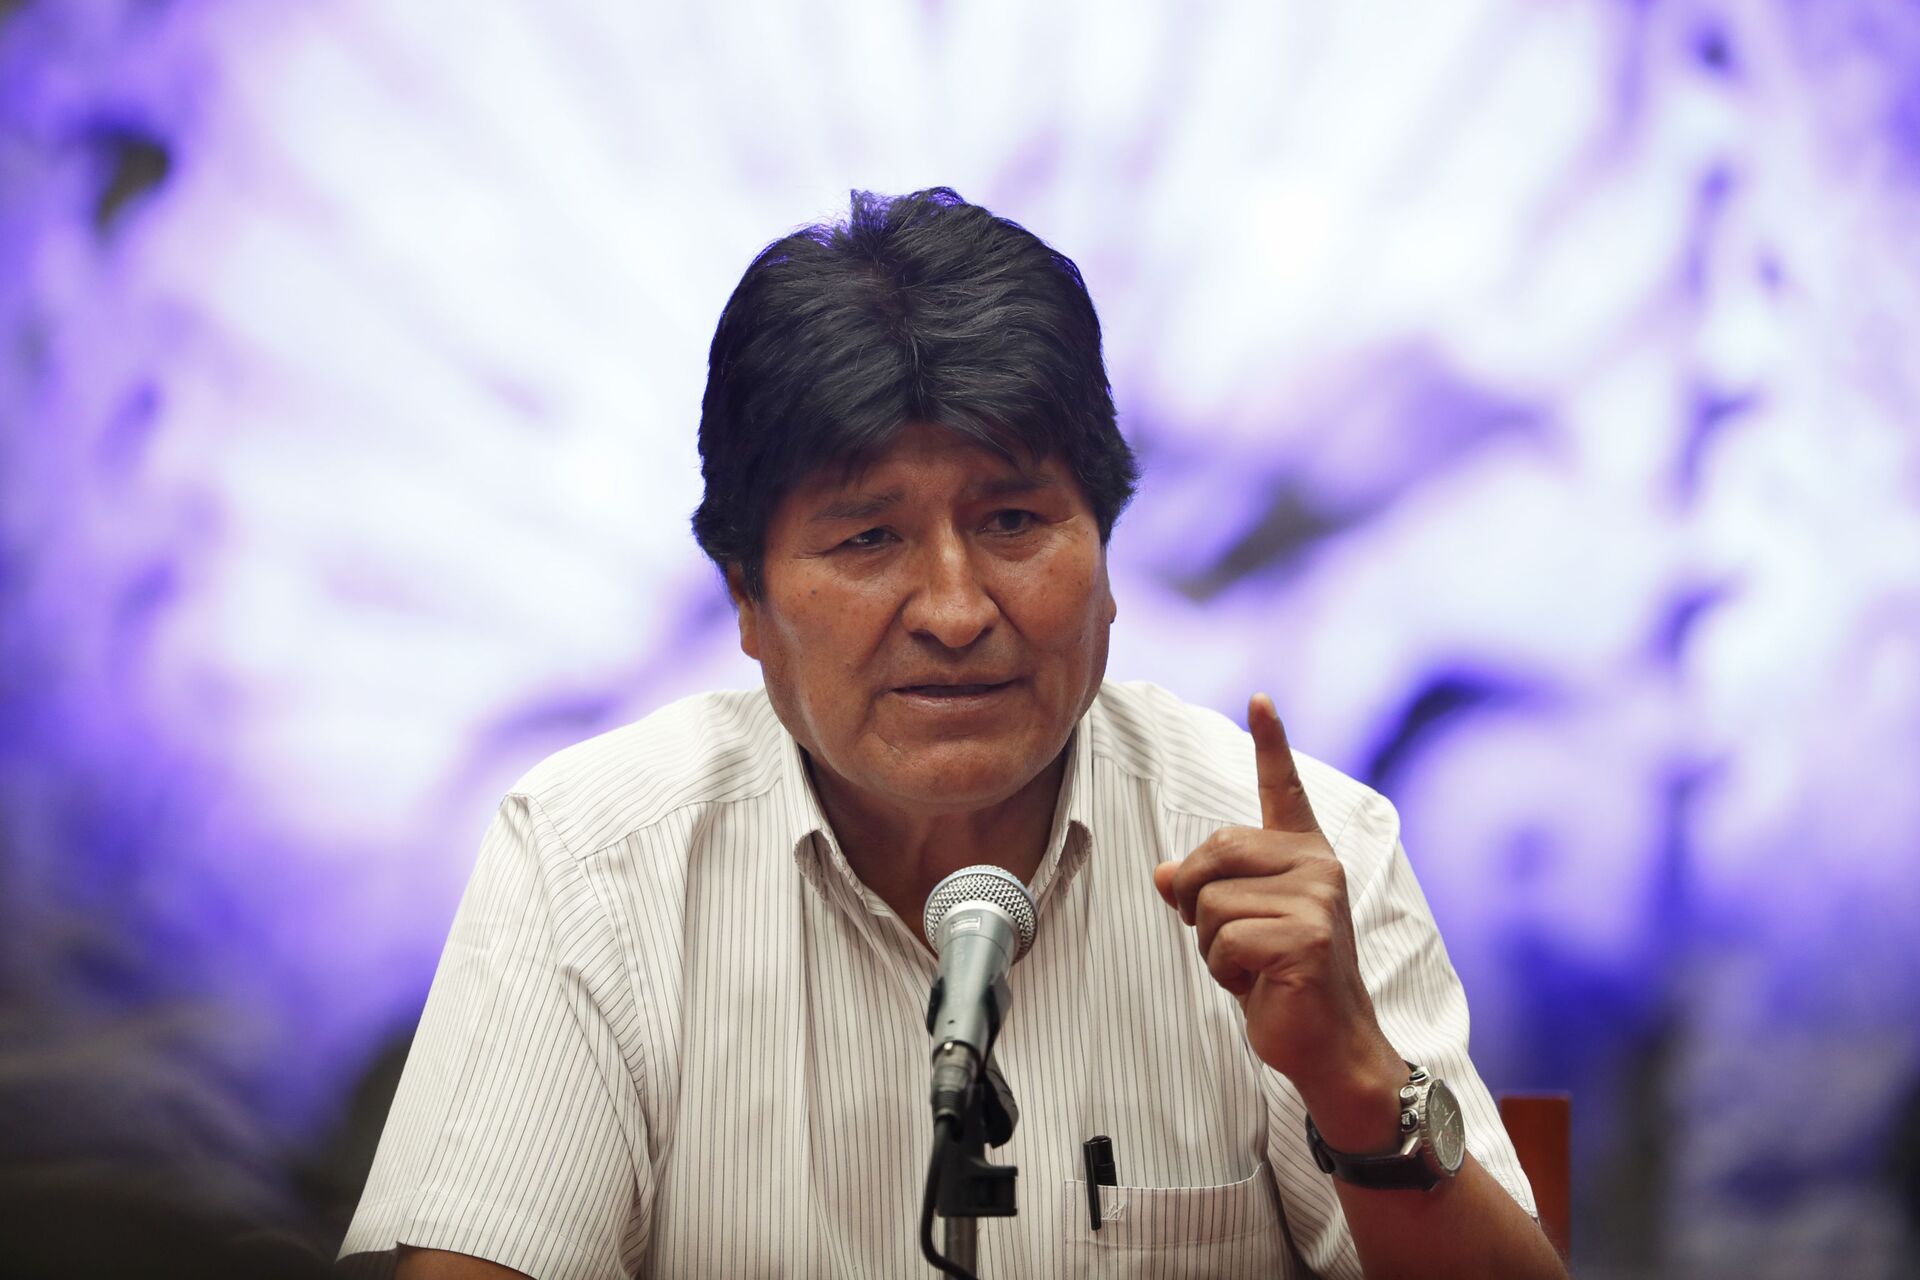 Bolivia's former President Evo Morales at a press conference at the Museum of Mexico City - Sputnik International, 1920, 10.03.2022